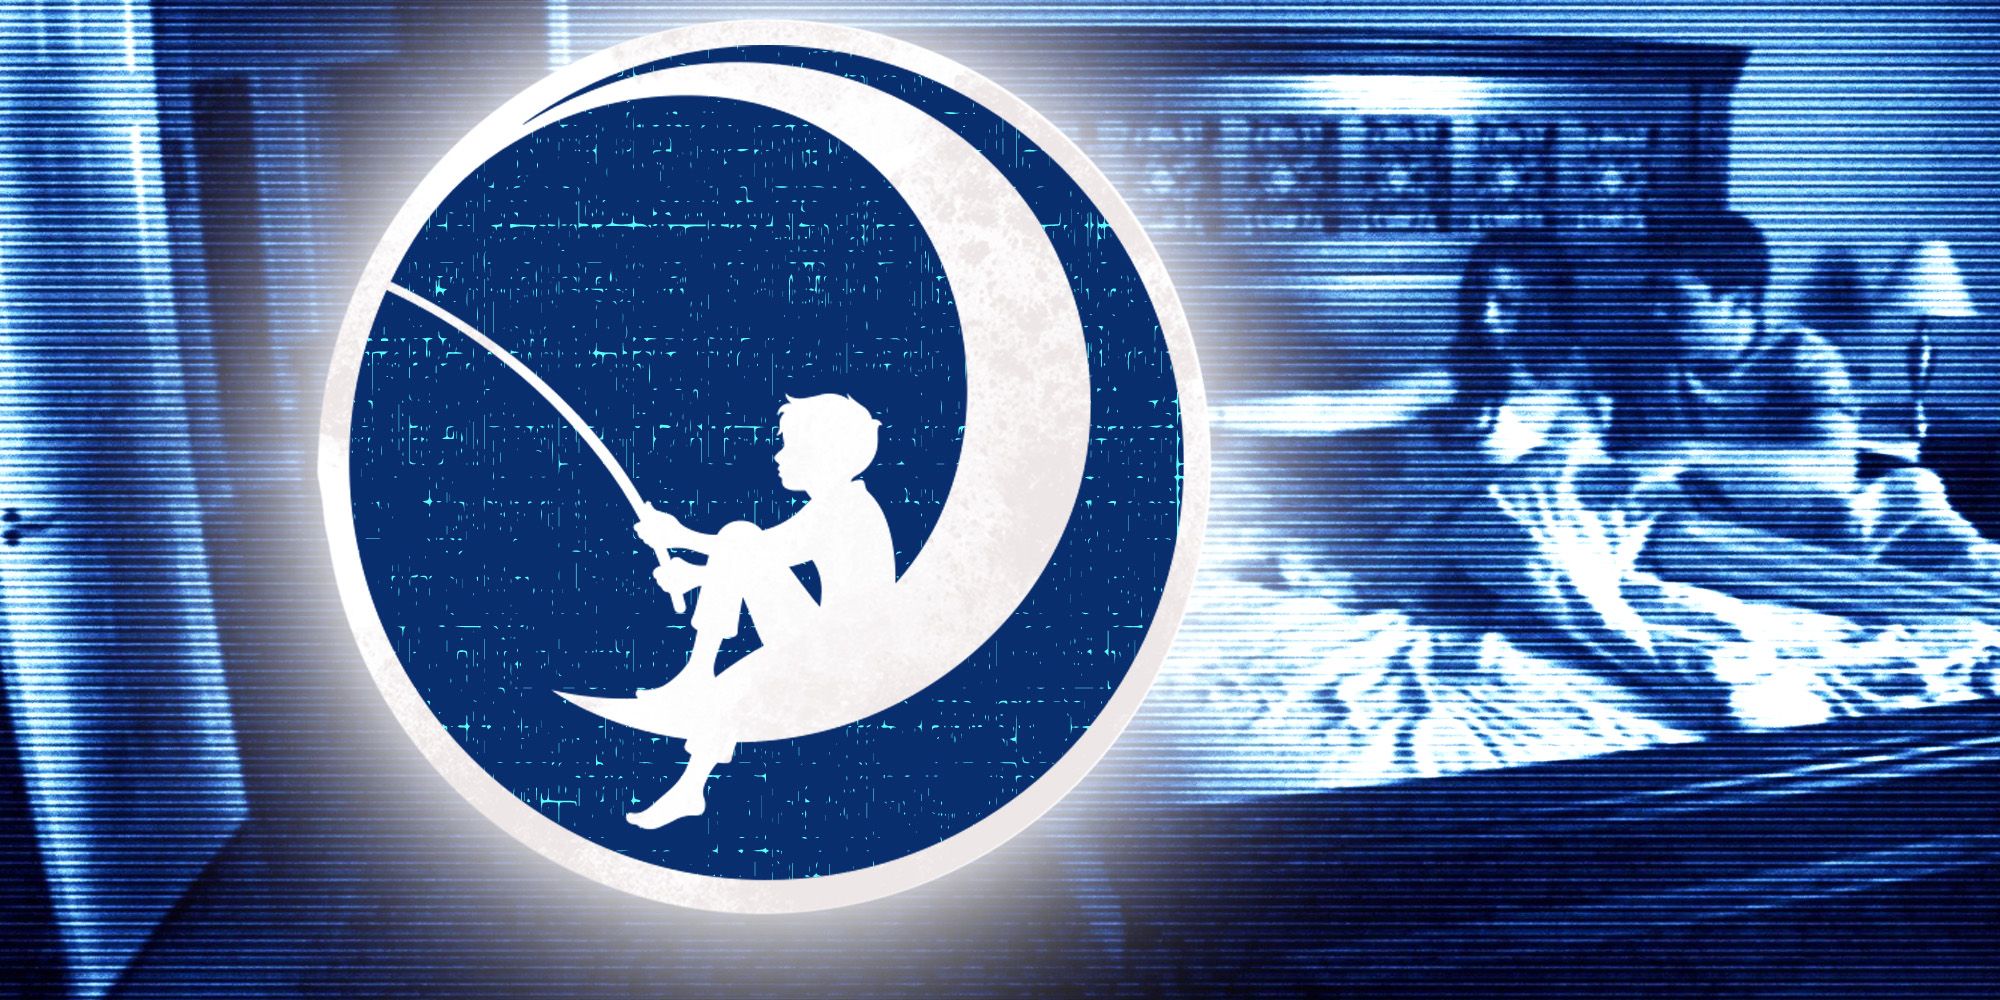 DreamWorks' Original Paranormal Activity Plan Would Have Killed The $900 Million Franchise